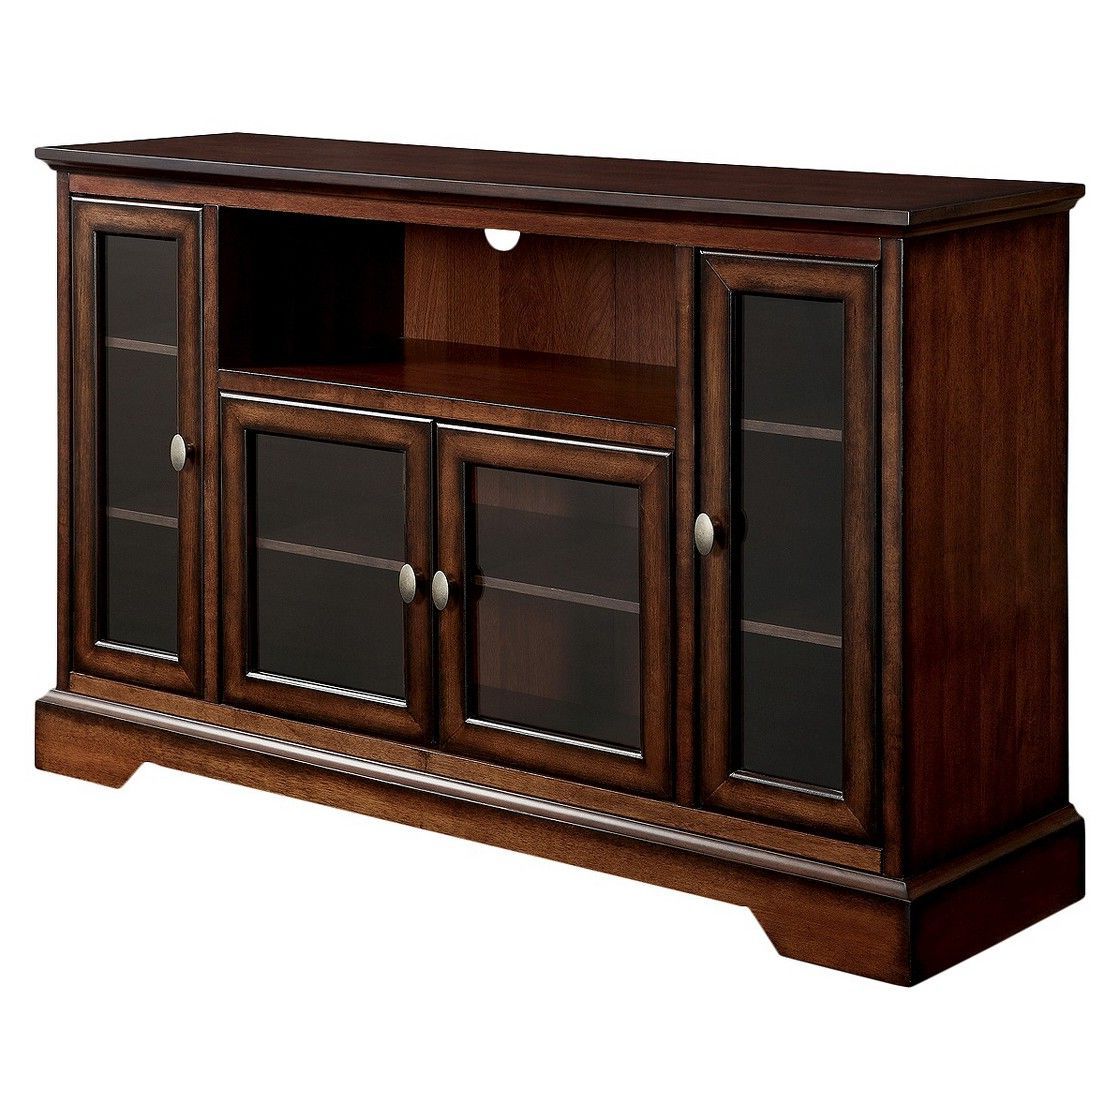 Glass Door Traditional Highboy Tv Stand For Tvs Up To 58 Intended For Kamari Tv Stands For Tvs Up To 58" (View 14 of 20)